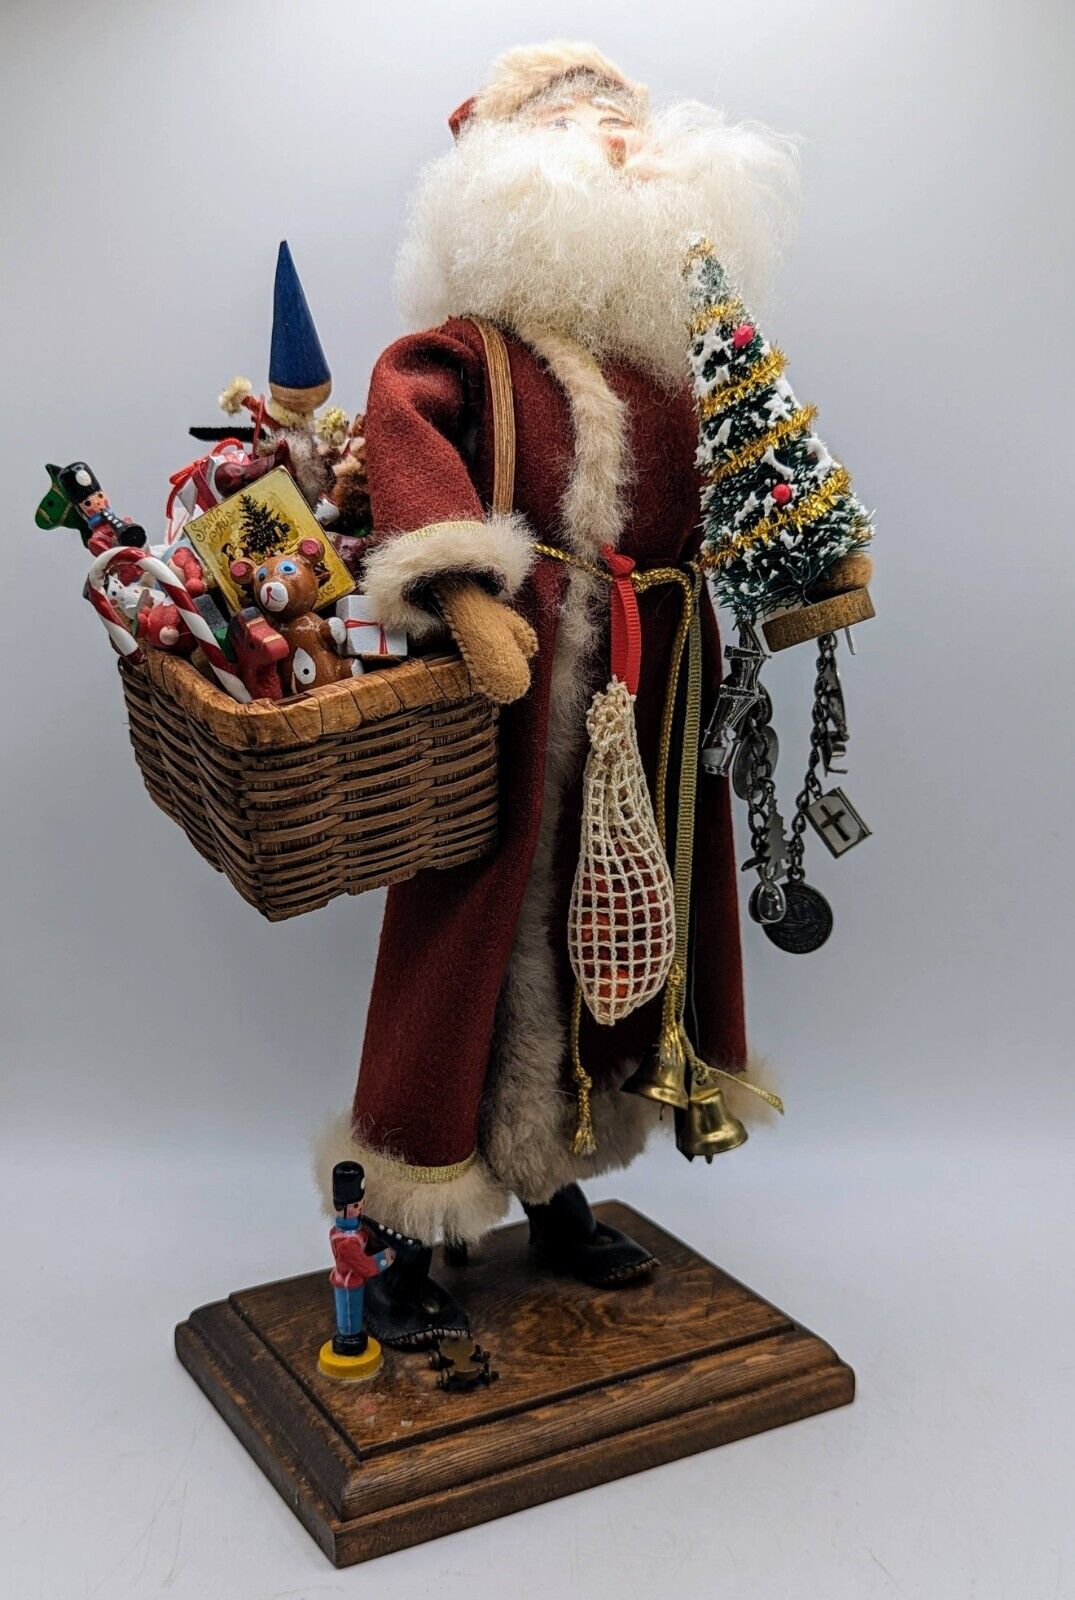 Handmade Red Santa With Toys Vintage Figurine Statue Crafted Luci Isaacs 1987